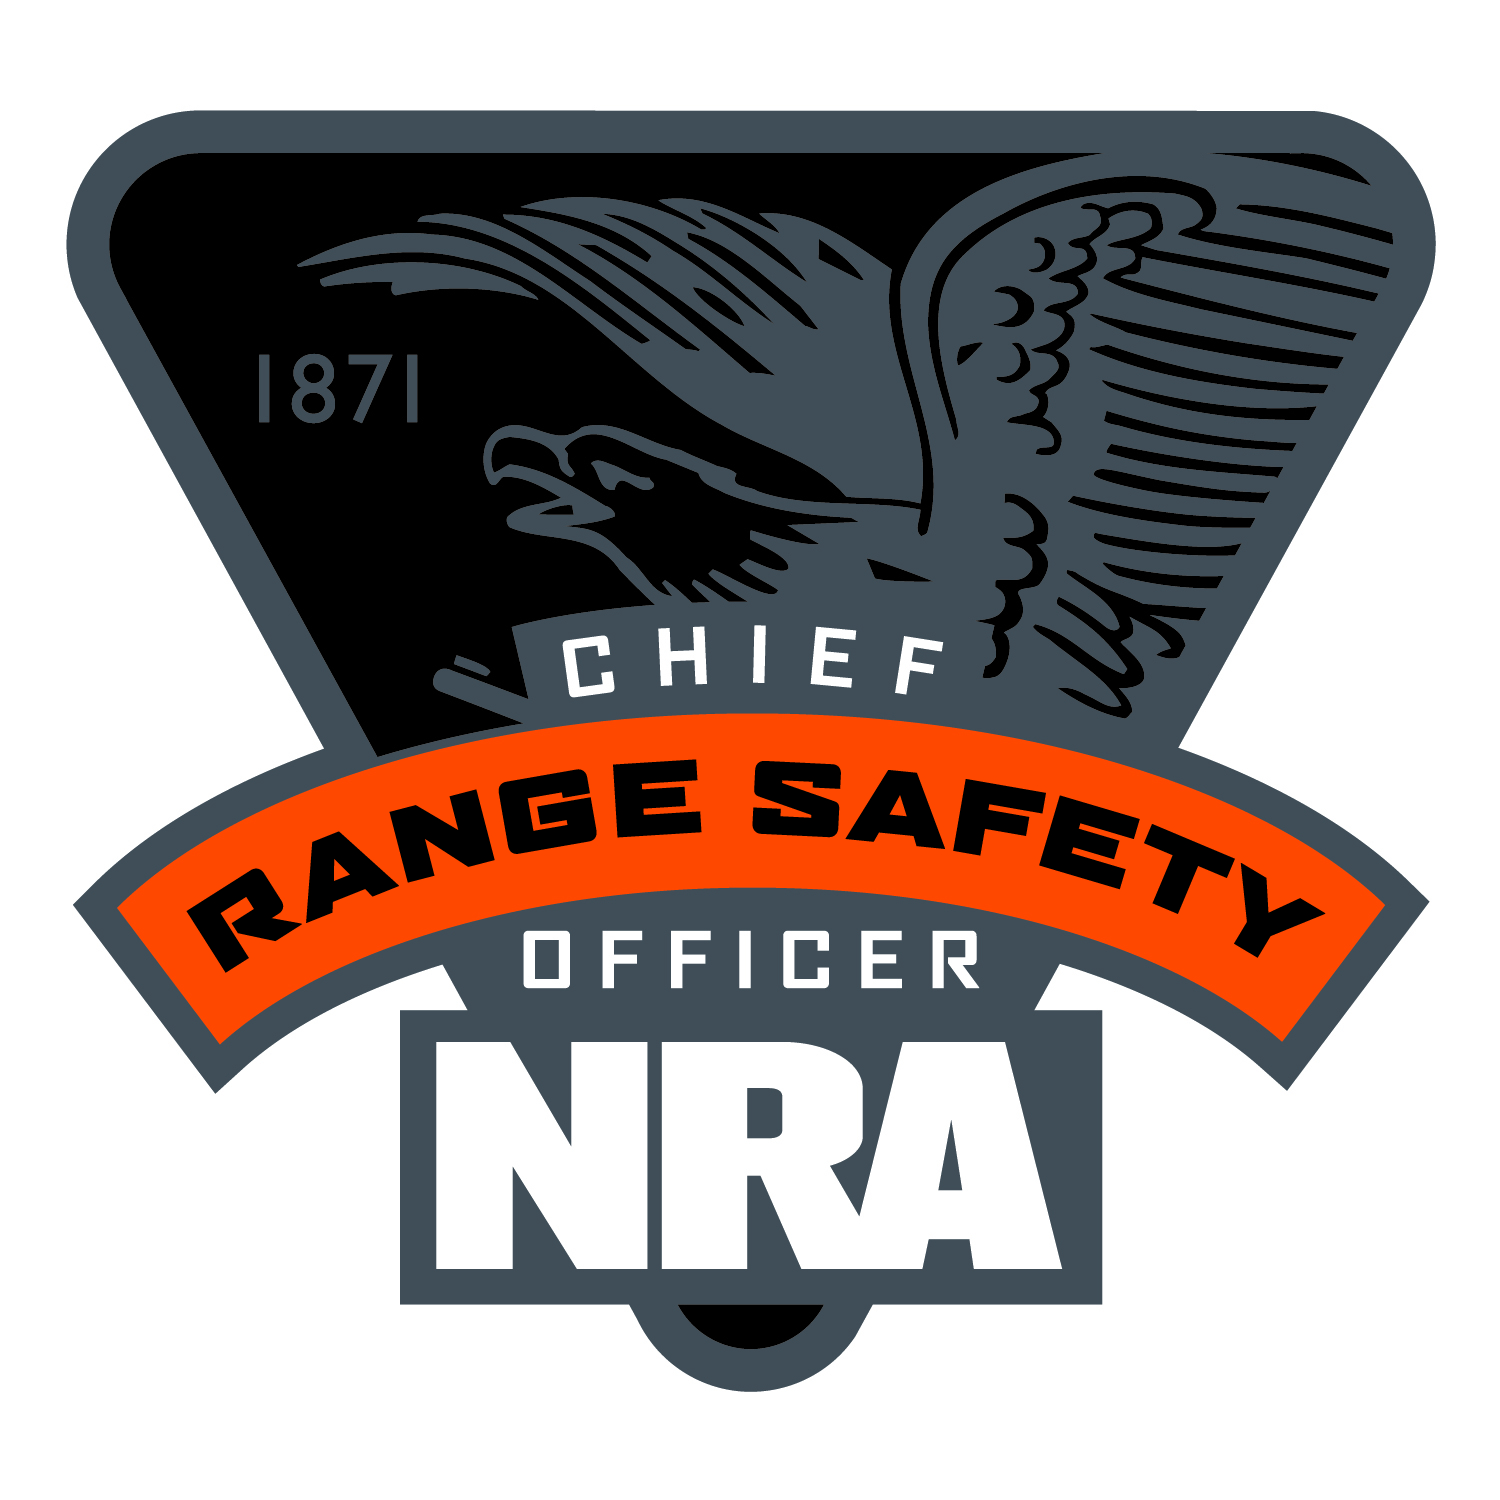 NRA Chief Range Safety Officer Patch